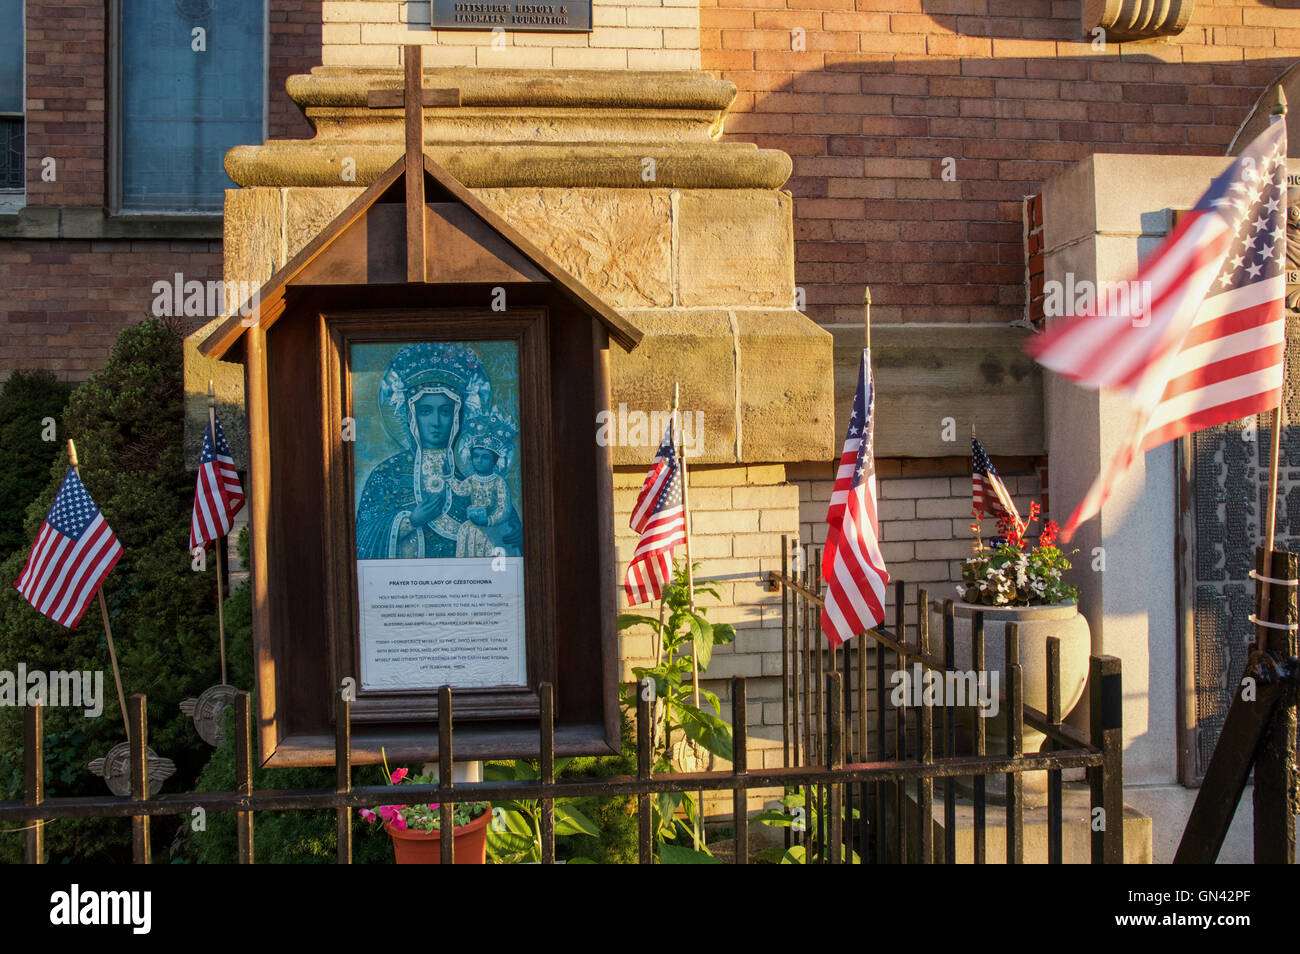 American flags wave next to a shrine to Our Lady of Czestochowa in Pittsburgh's Polish Hill neighborhood Stock Photo